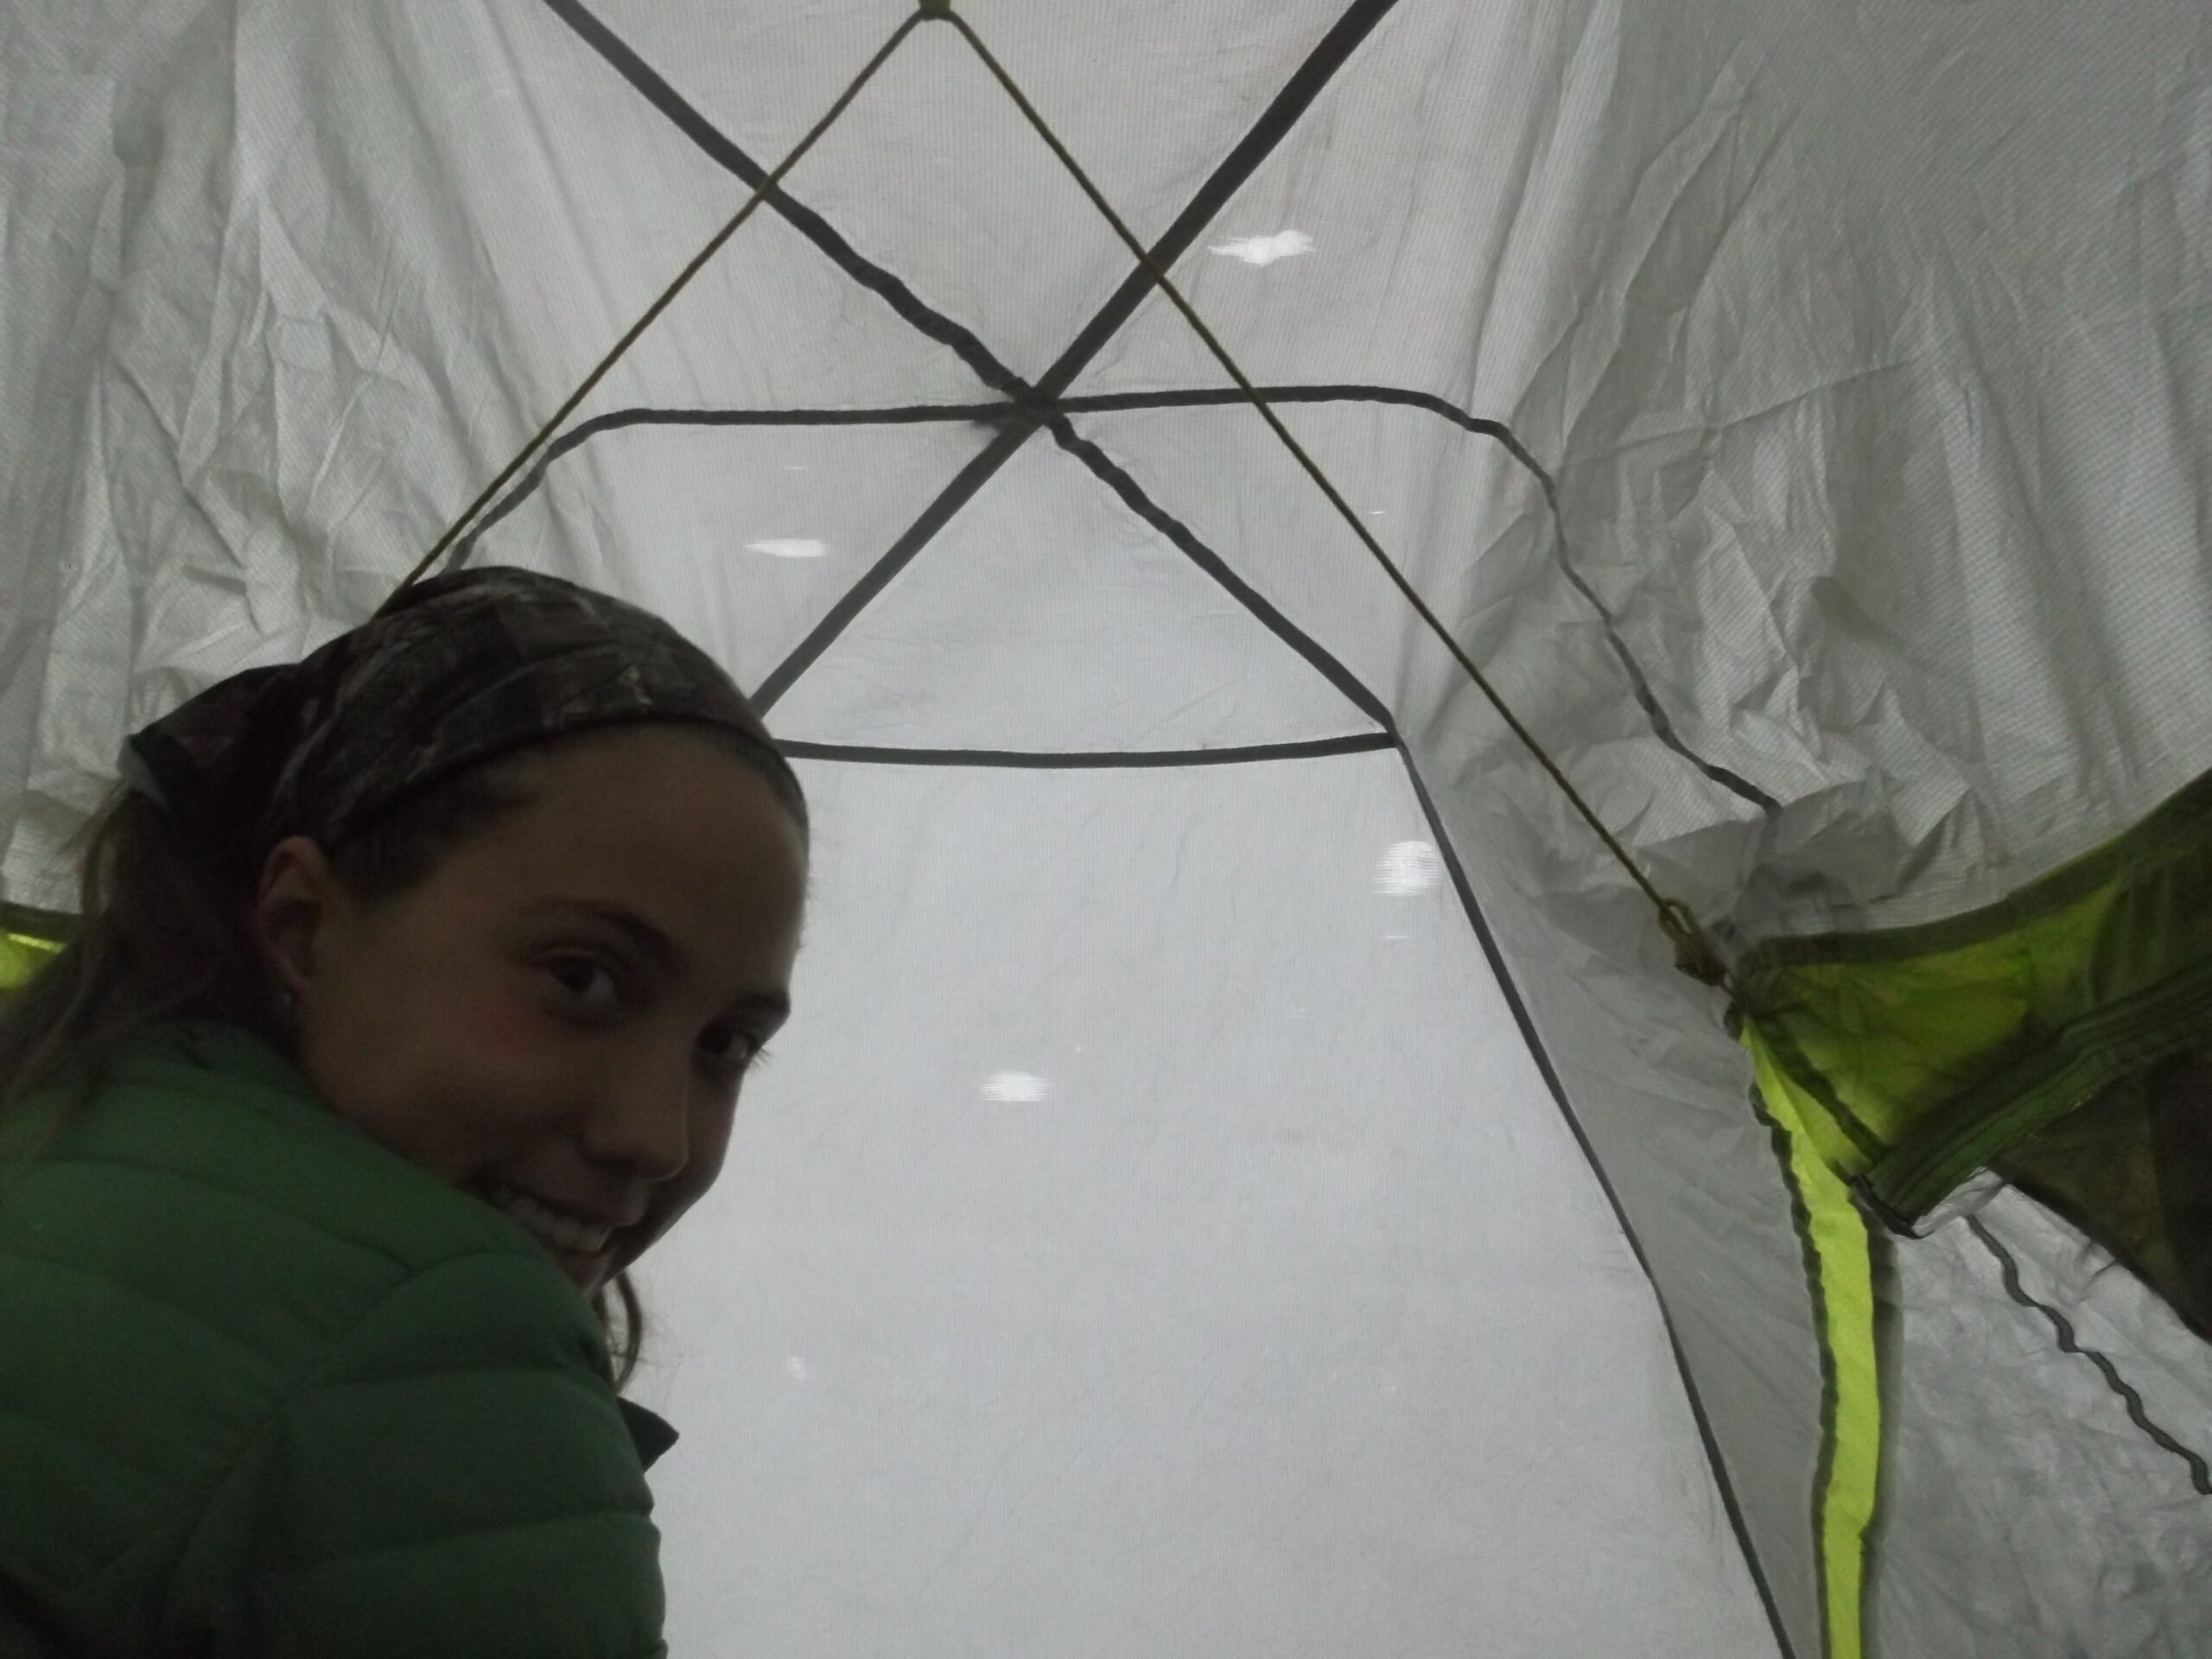 Rainy day in the tent